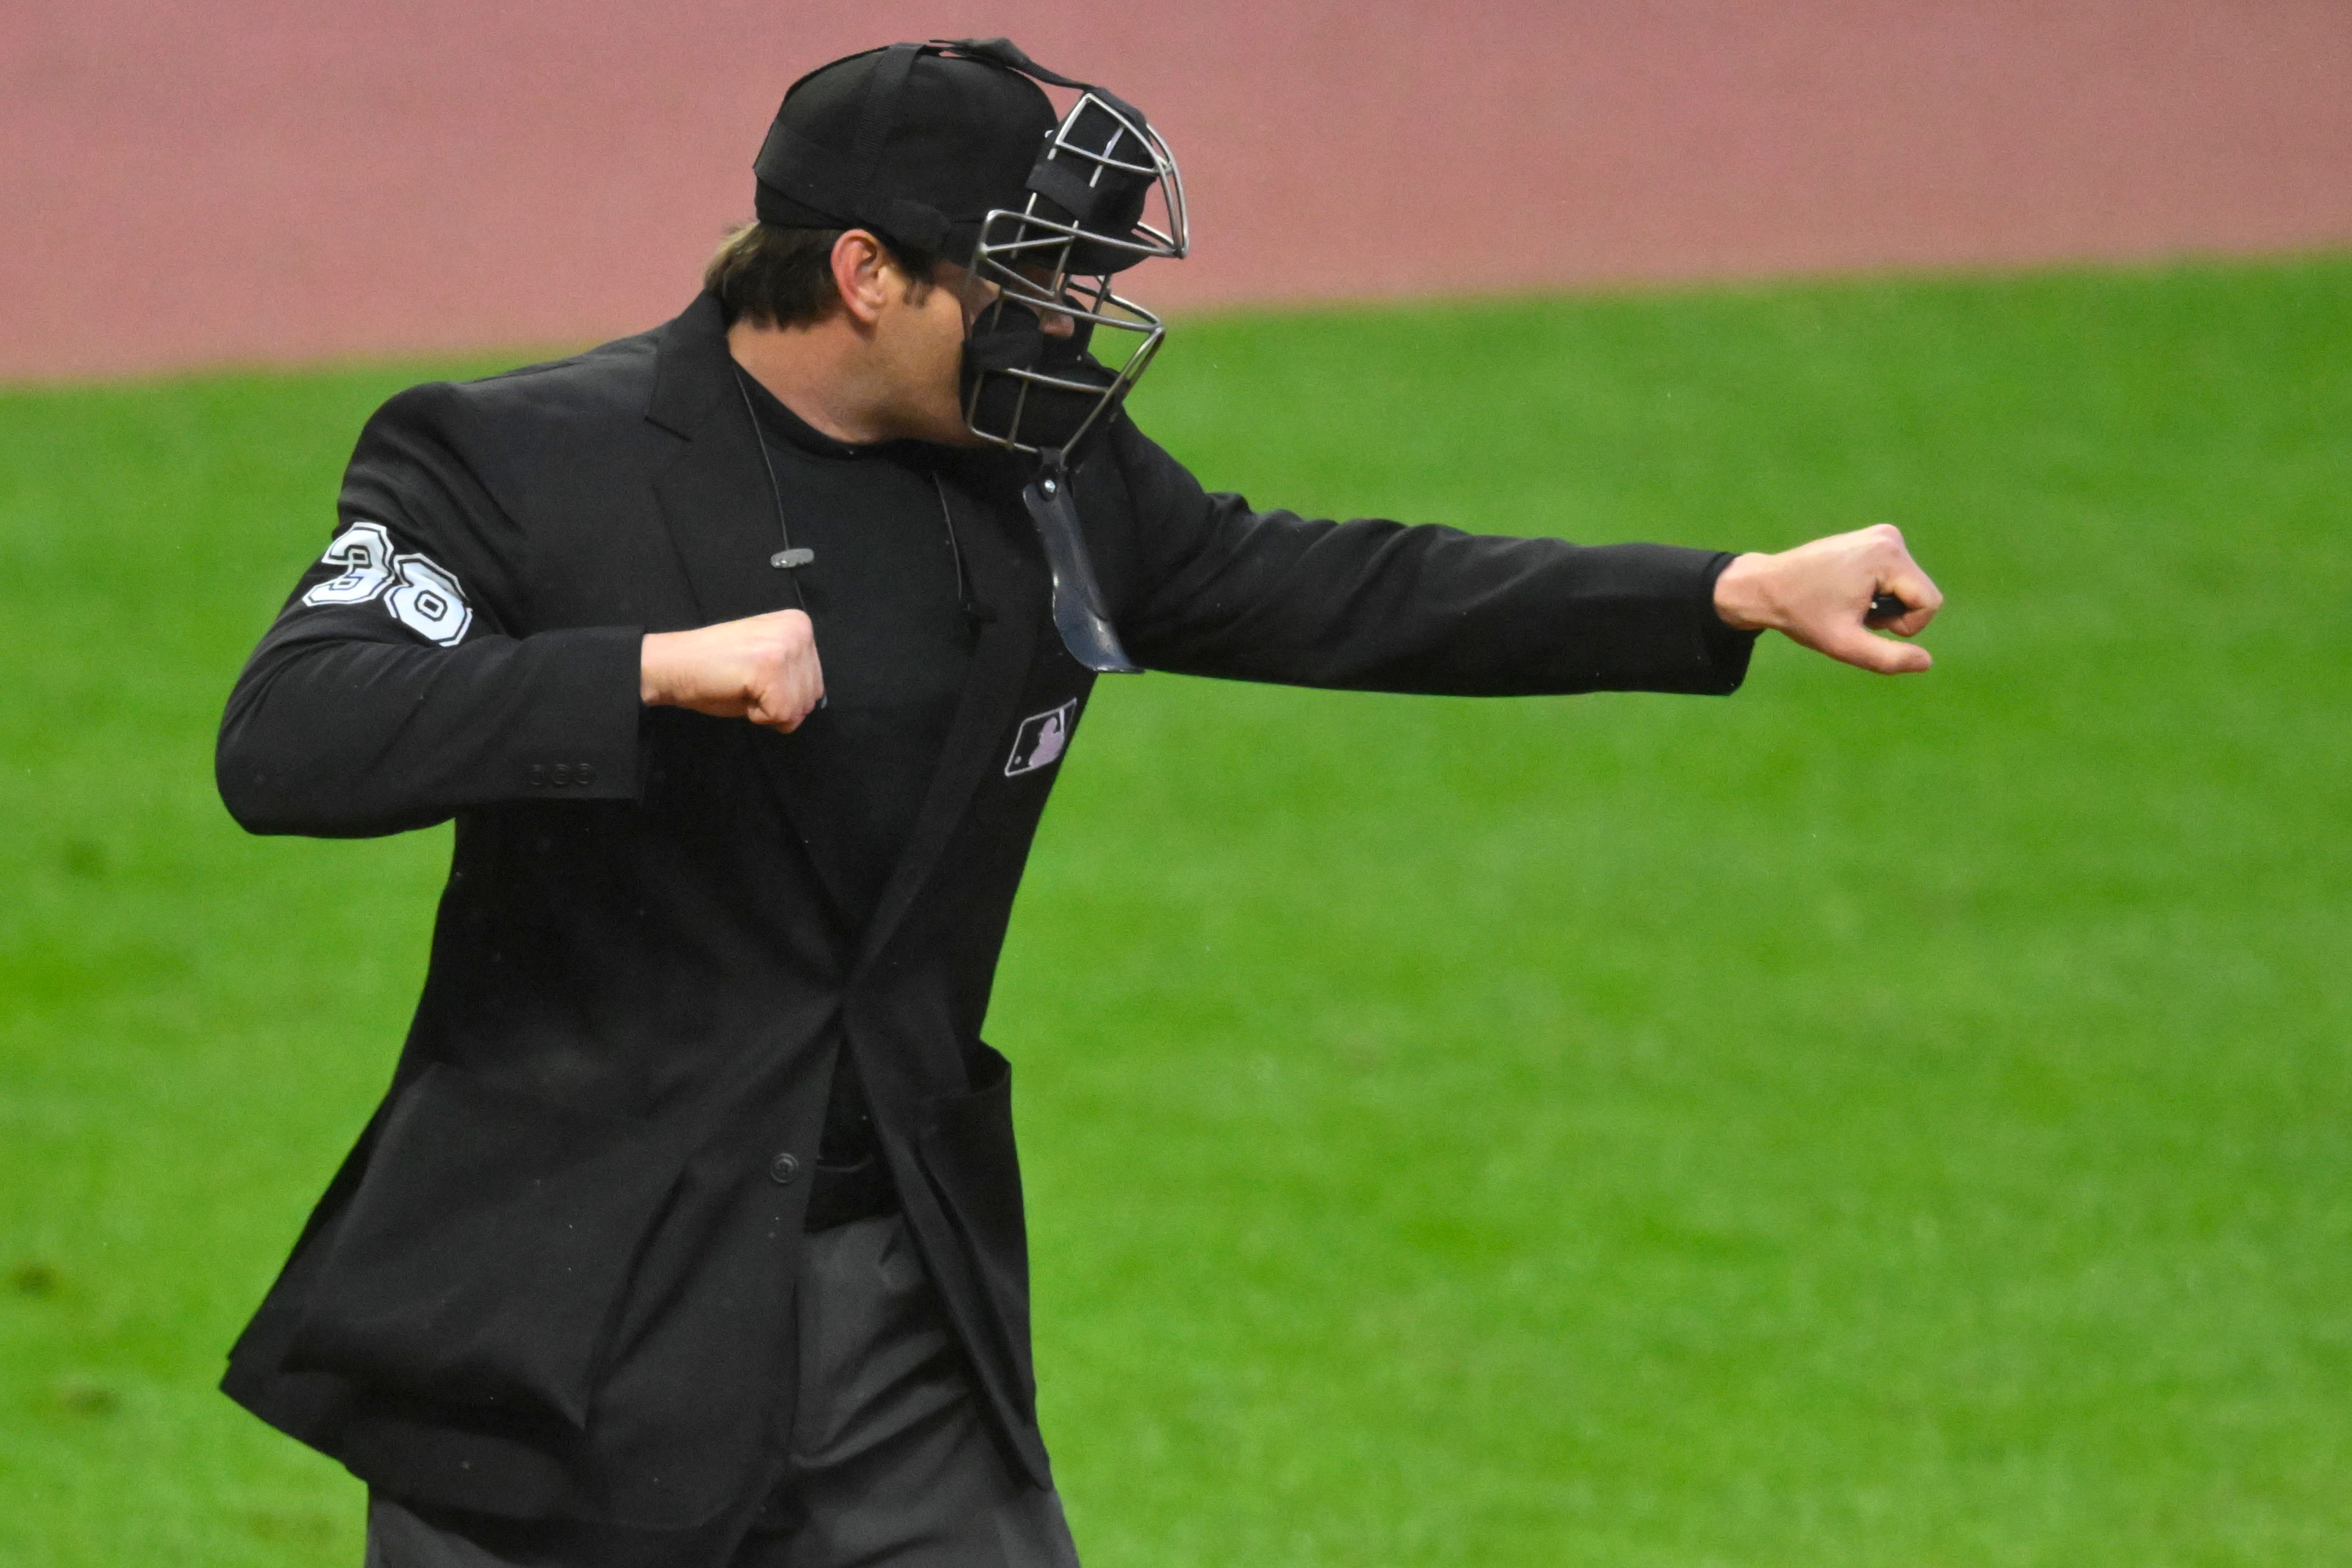 A former umpire is suing the MLB